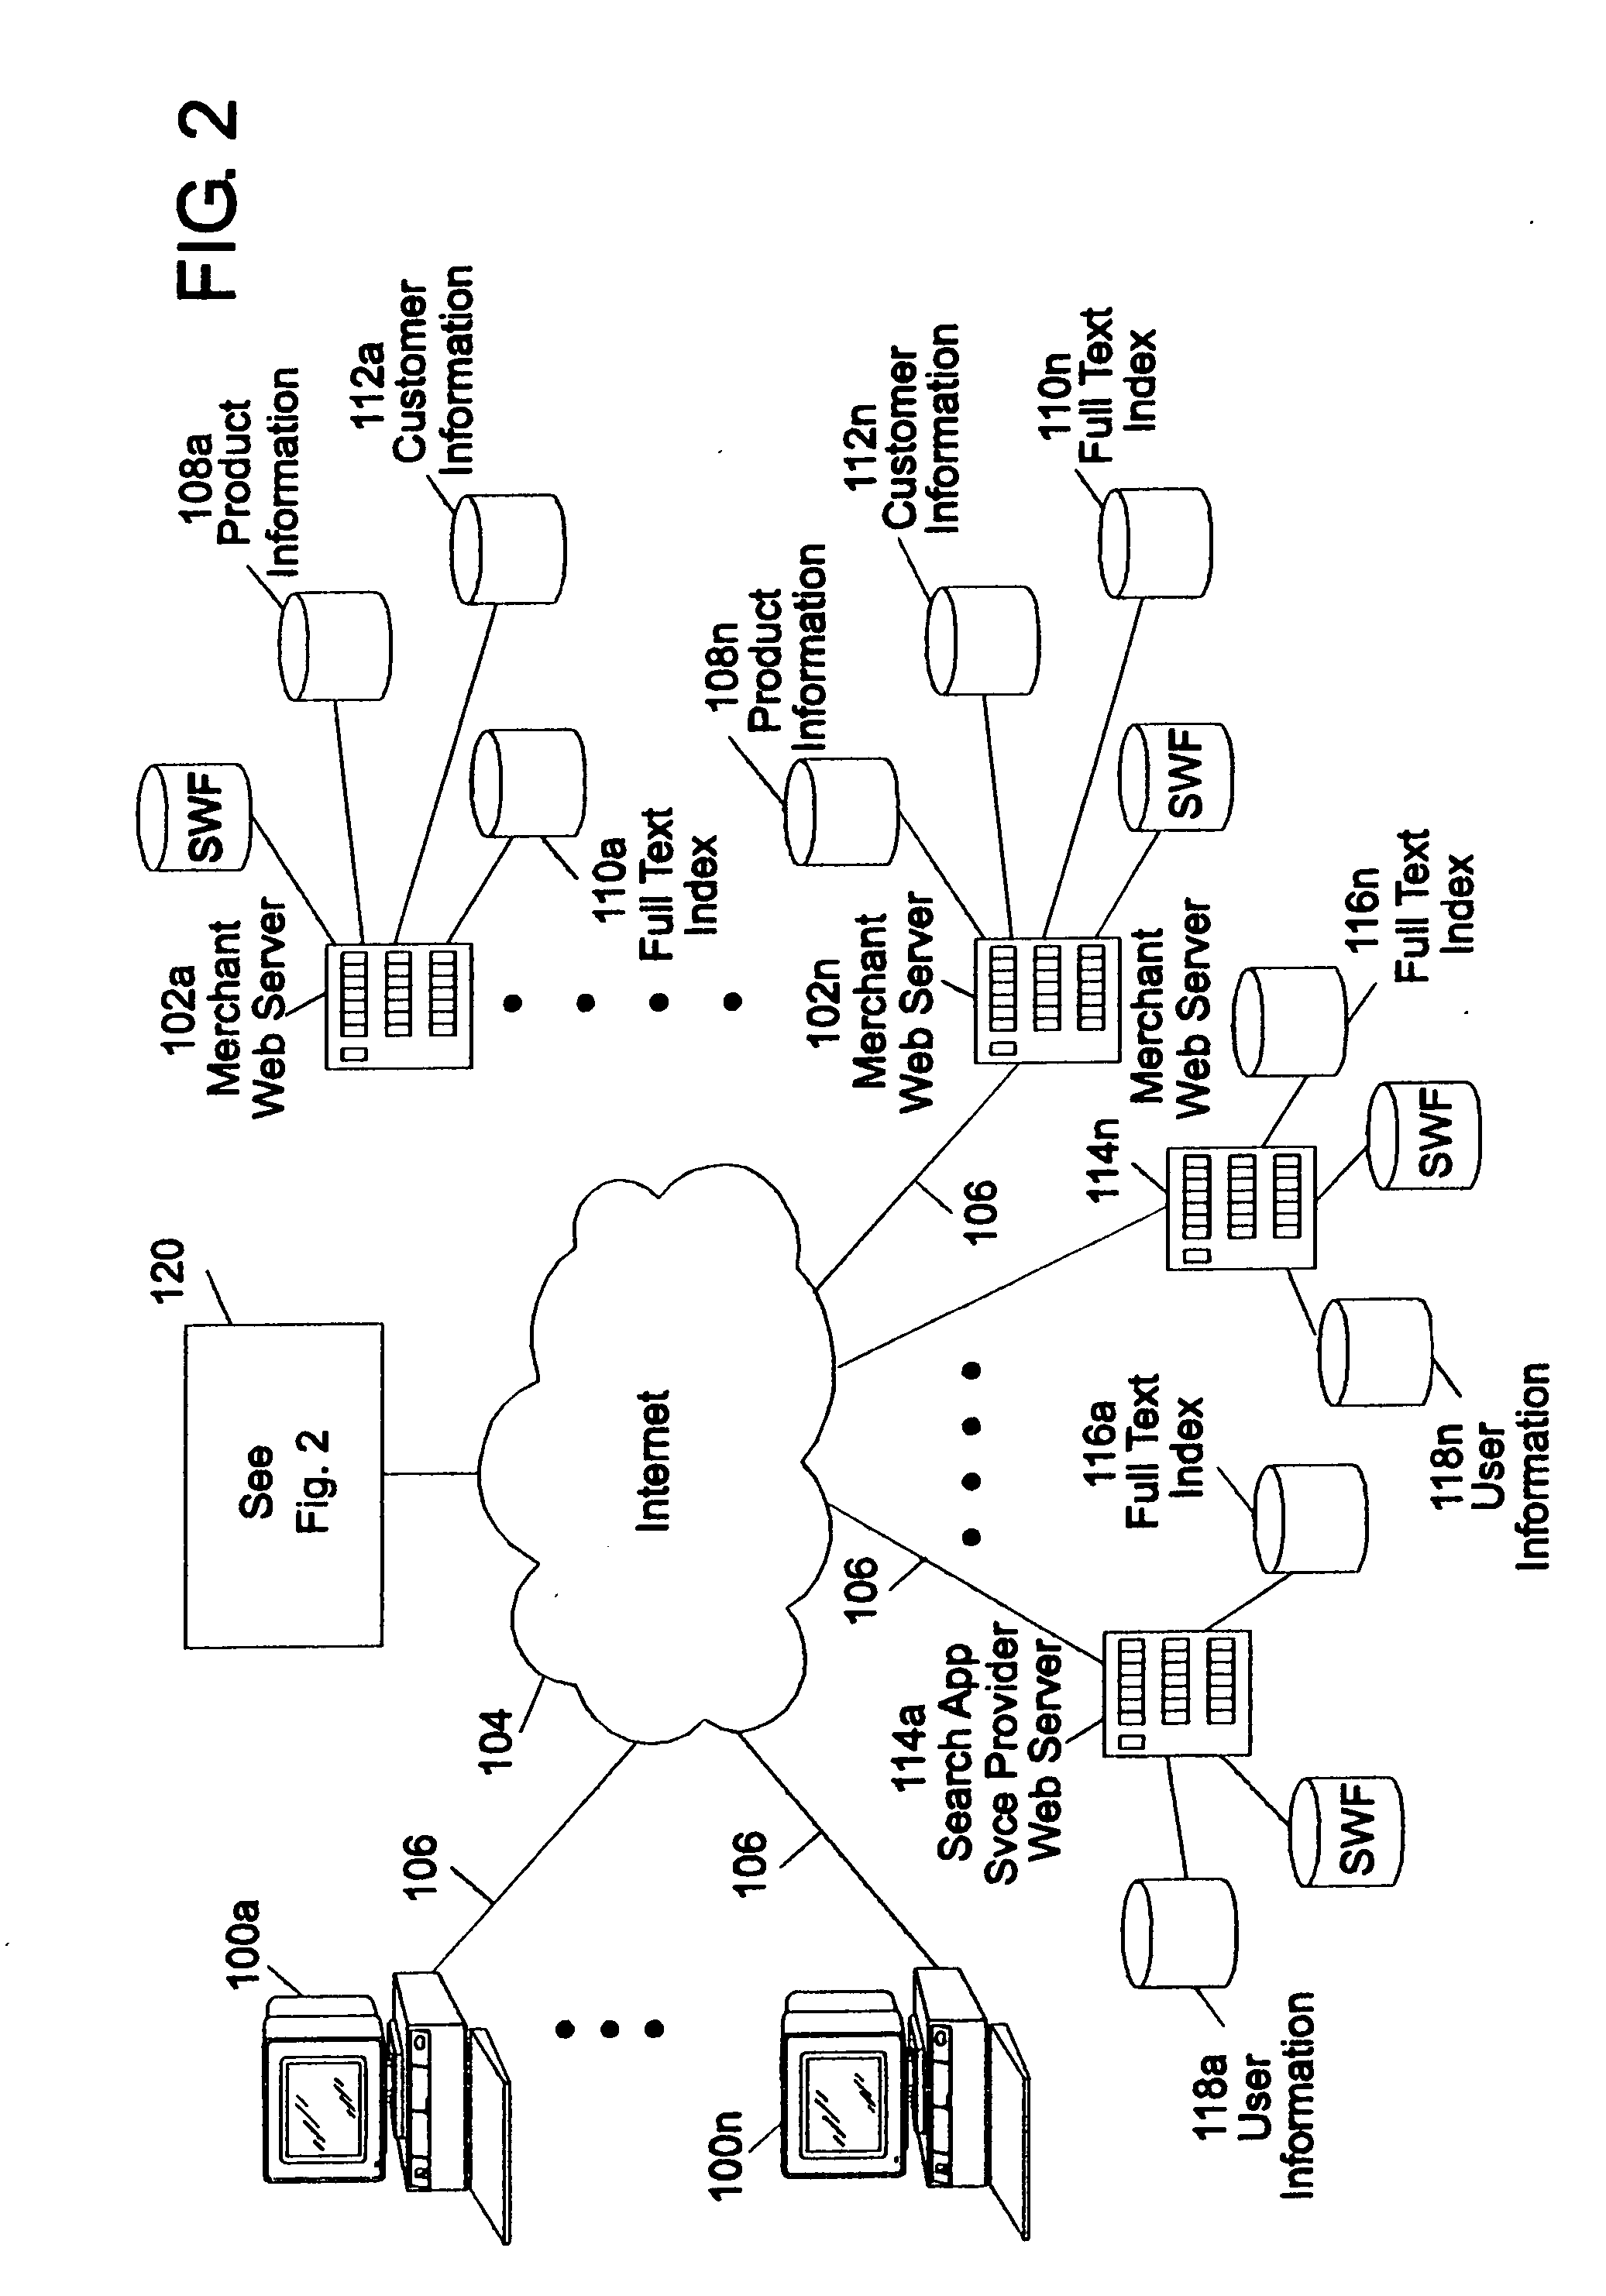 Method of self enhancement of search results through analysis of system logs